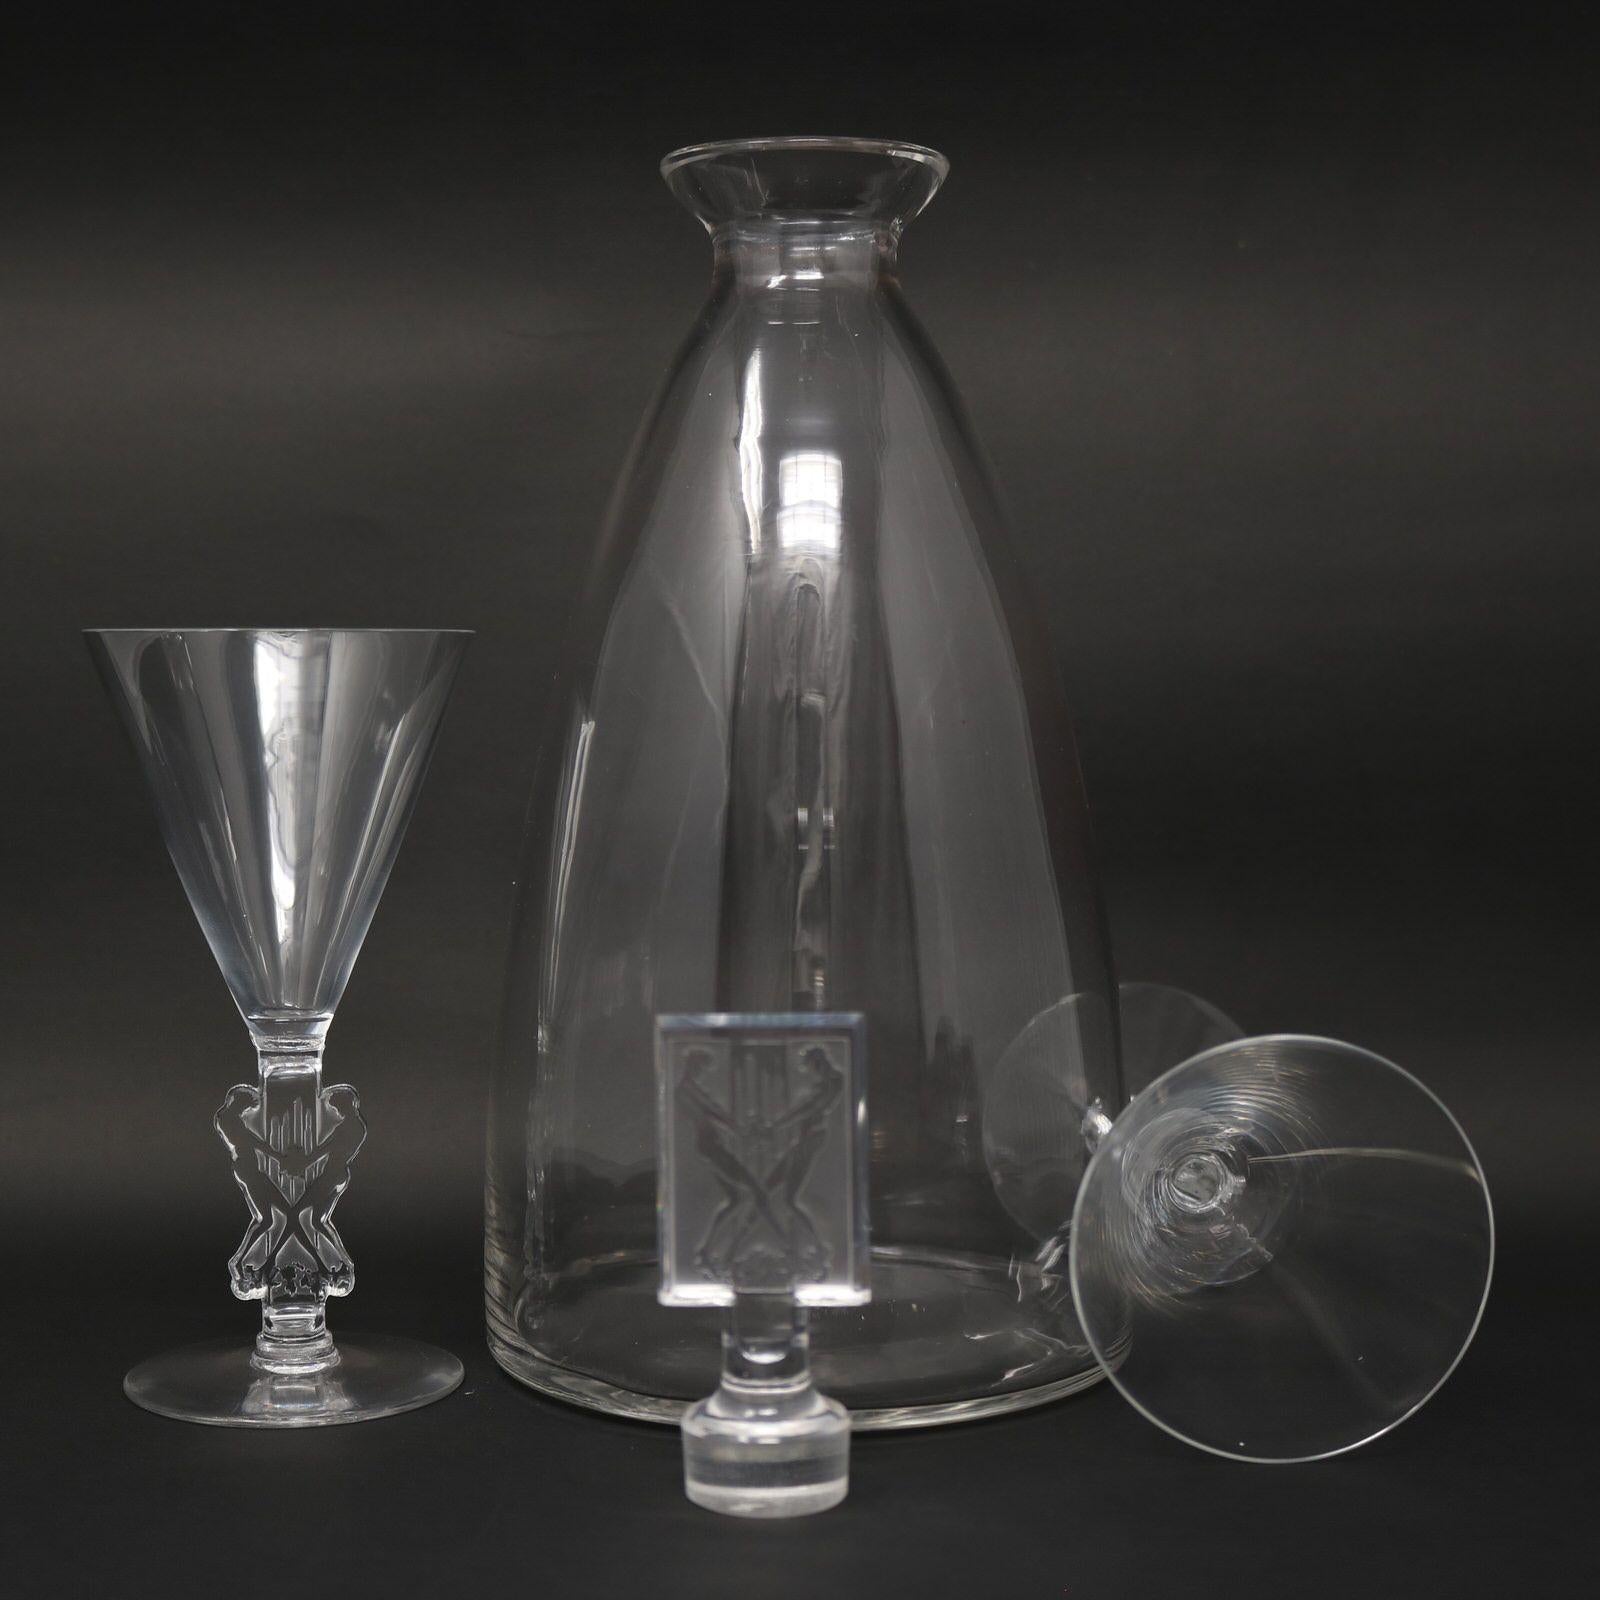 Rene Lalique Glass Decanter with Pair of Glasses 'Strasbourg' Design 4